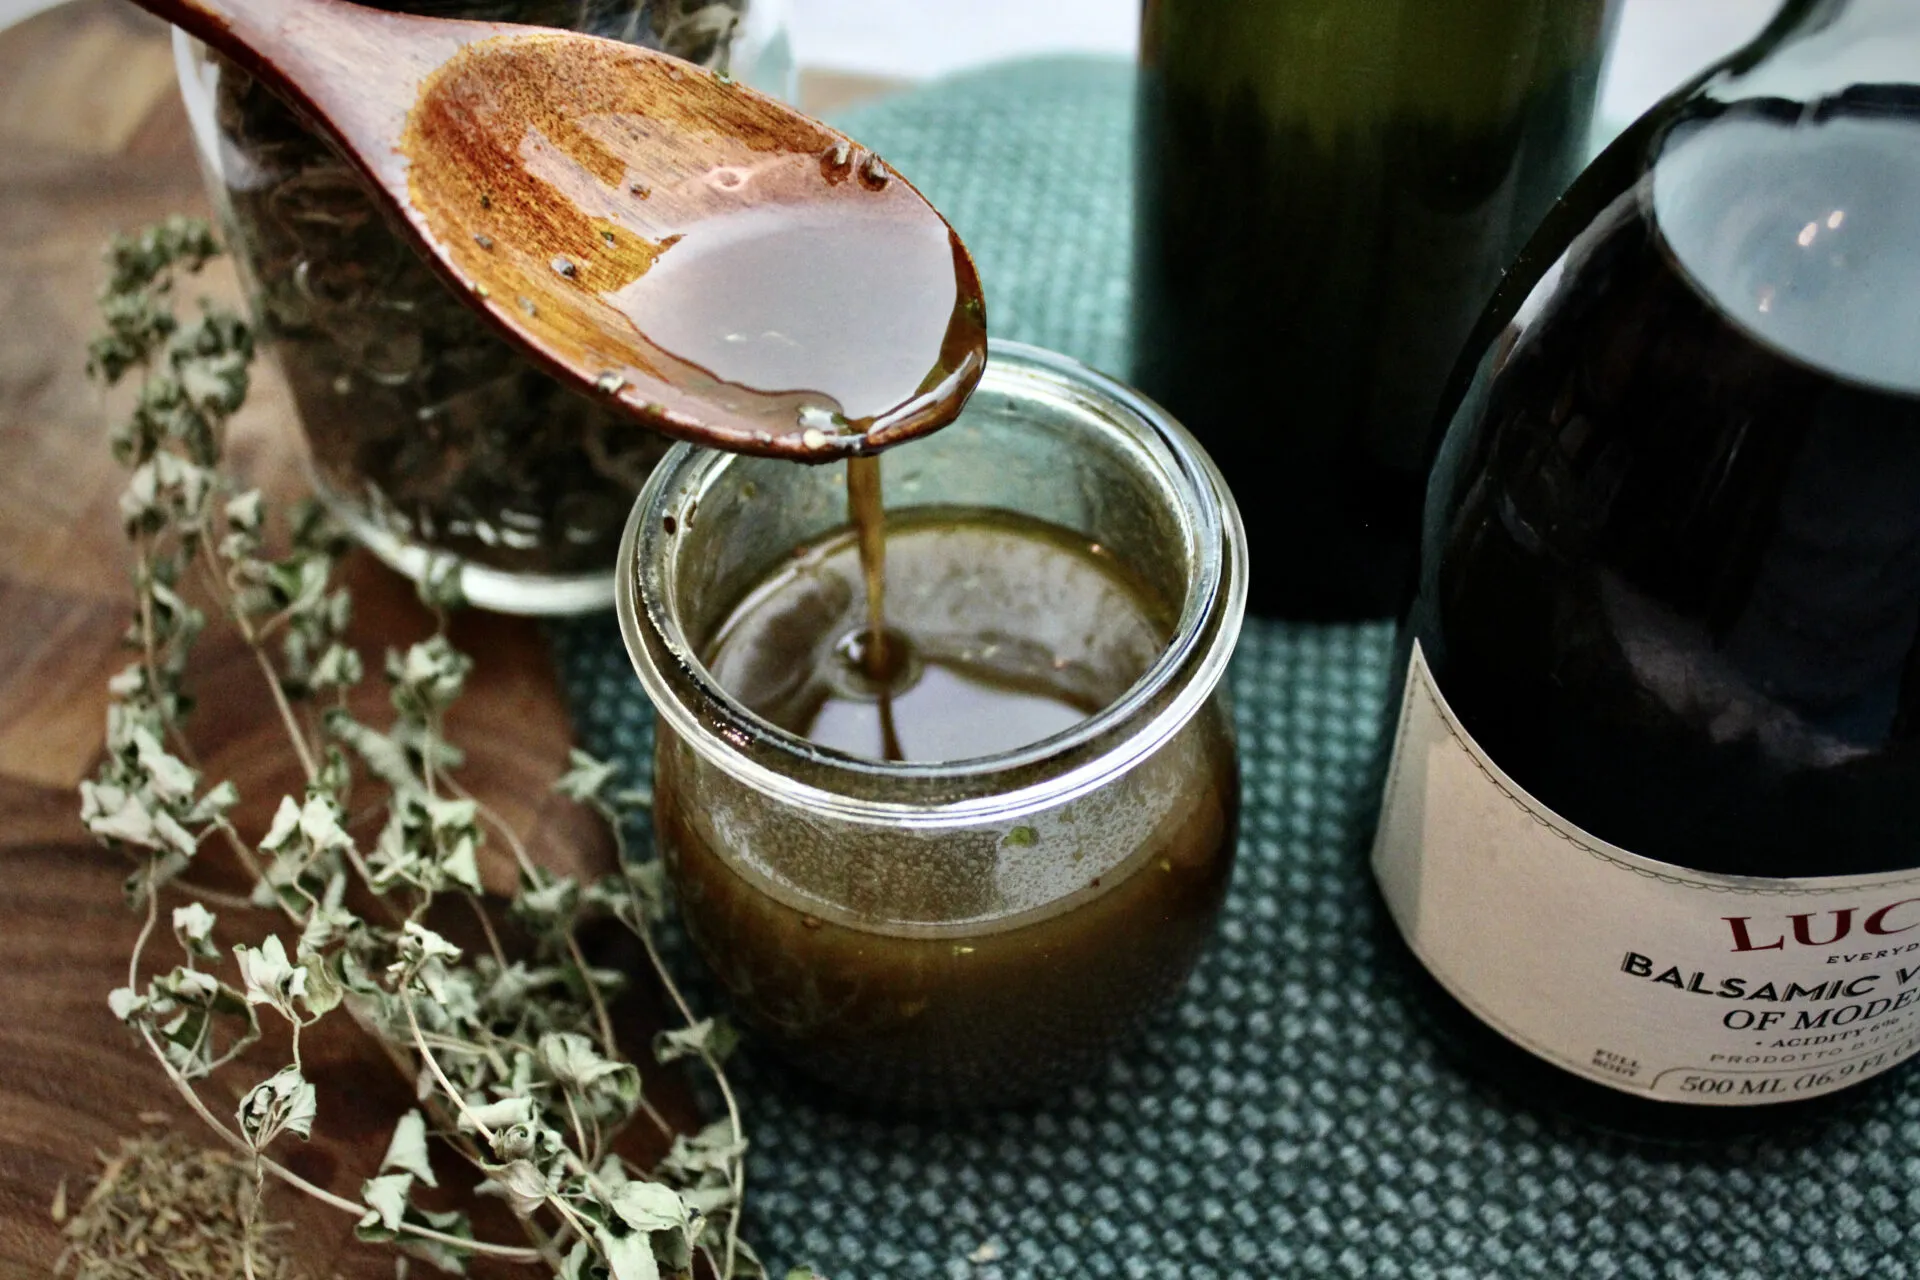 The perfect Balsamic Vinaigrette recipe for salads, marinades, sandwiches, wraps, and more. Super simple & ready in less than 5 minutes!